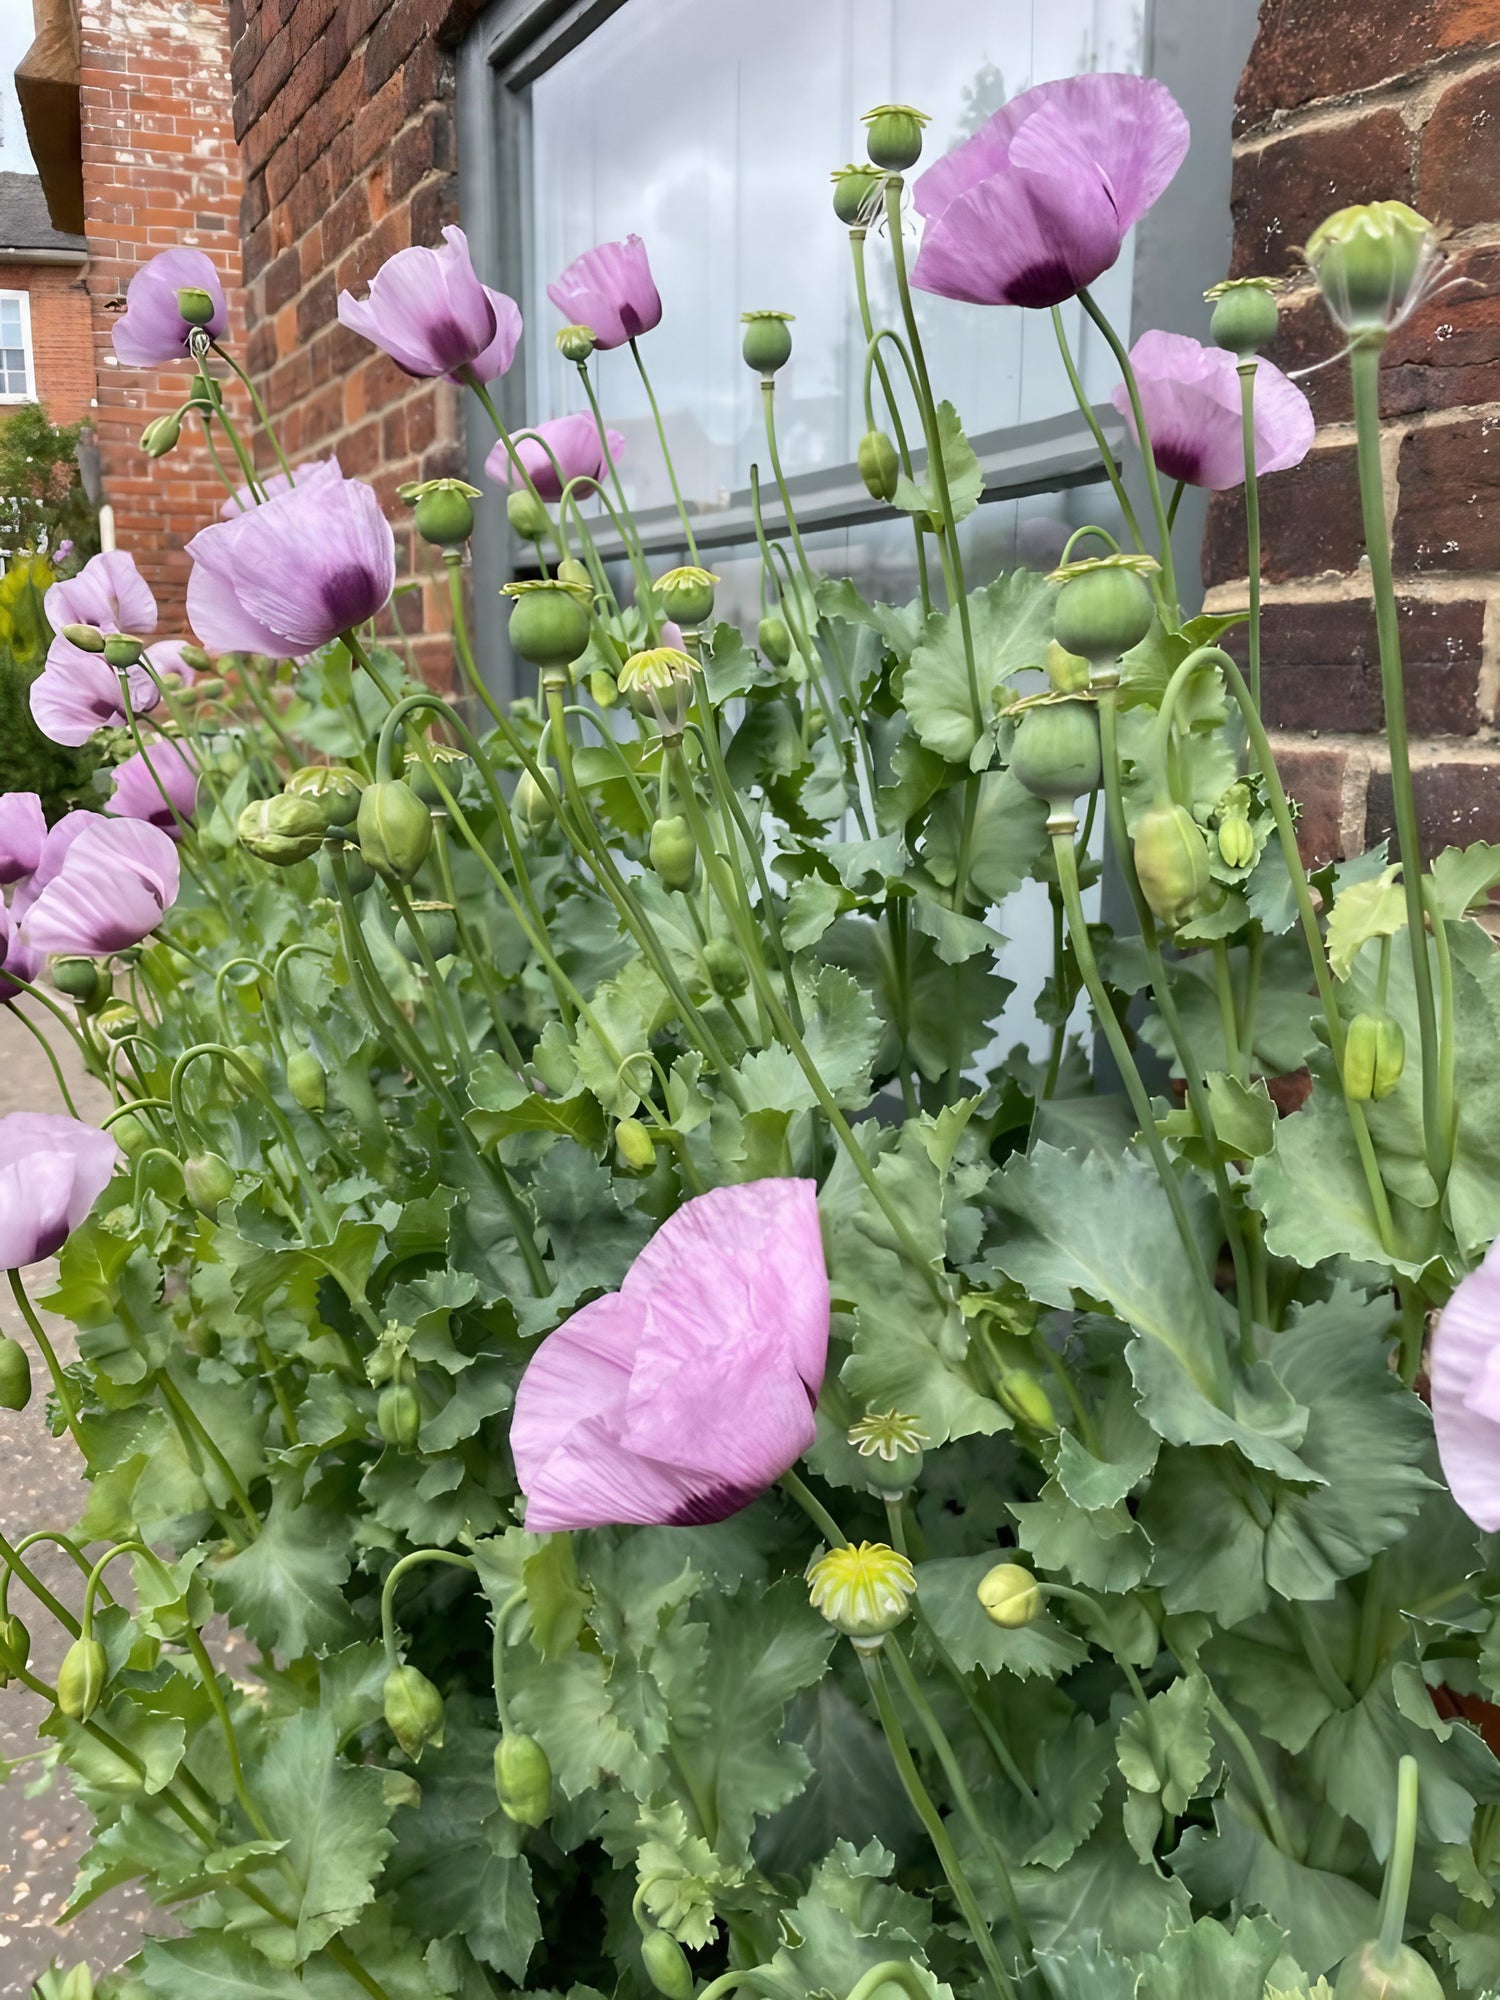 Hungarian Blue poppies planted in a large container against a brick wall